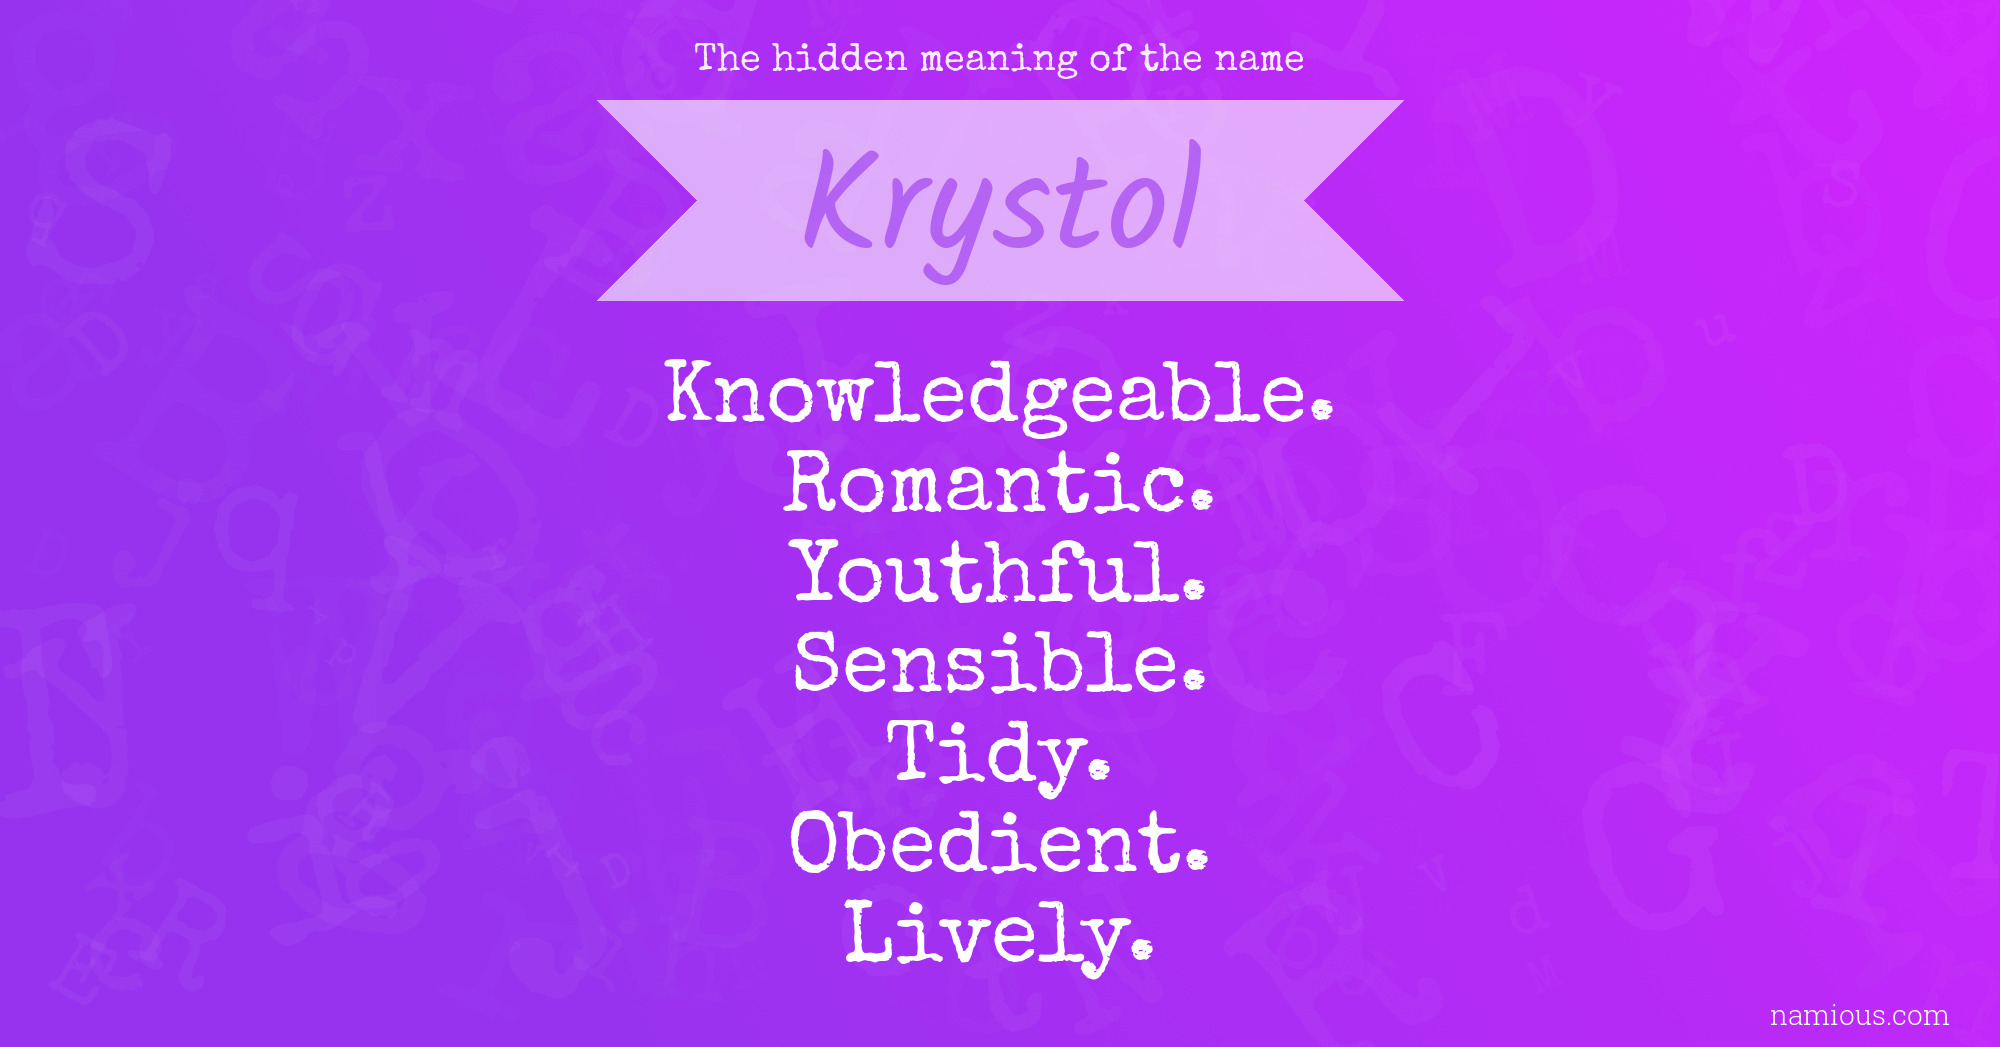 The hidden meaning of the name Krystol